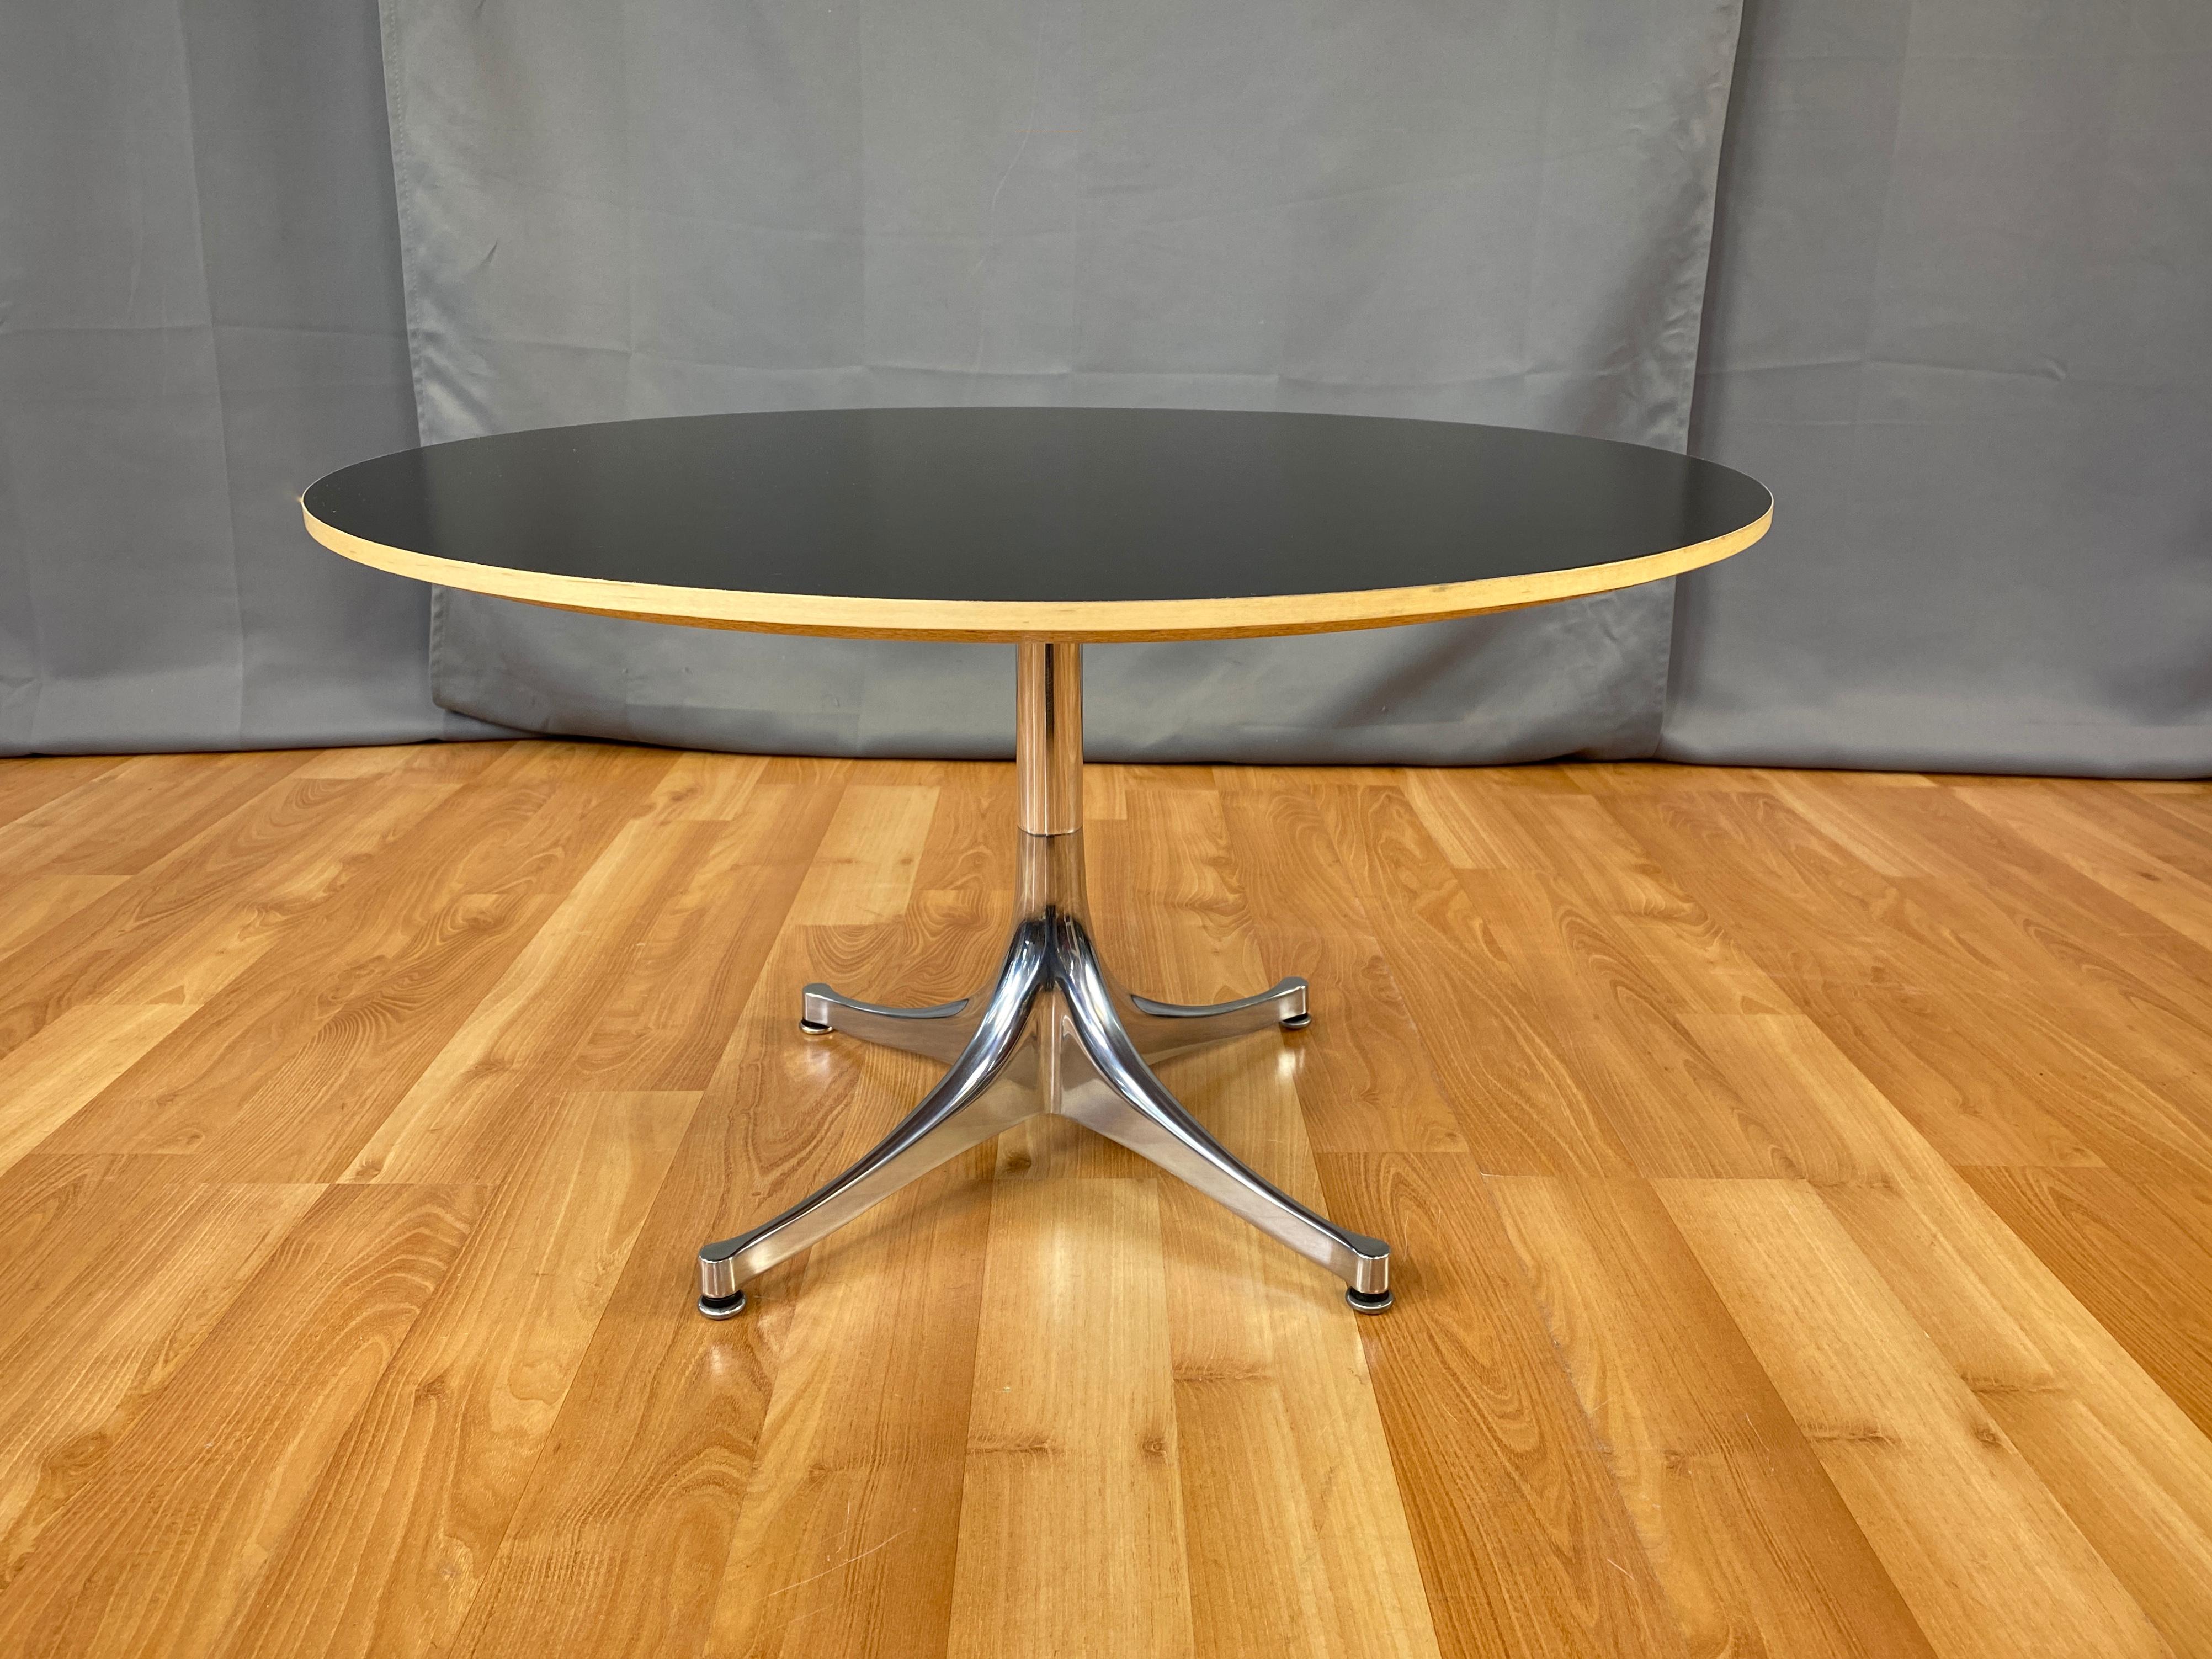 Offered here is a George Nelson design pedestal coffee table for Herman Miller.
Tapered legs rise up to a single polished aluminum column, which holds the large black round laminate top that's bordered in beech.